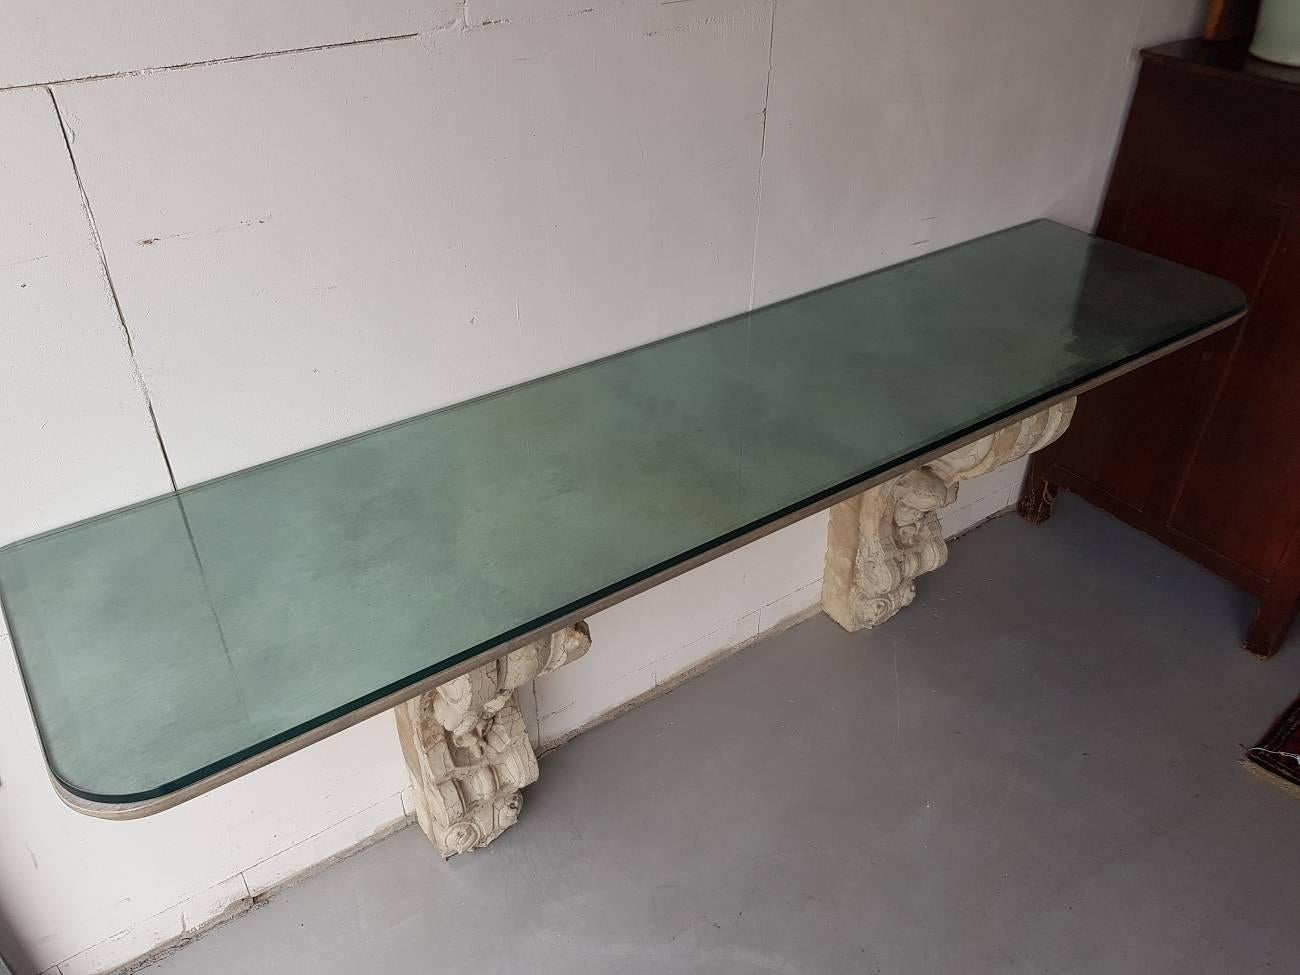 Wall console table with 18th century sandstone equipped with wooden sheet with grey marbled pattern, and if a thick top glass plate with faceted edge.

The measurements are,
Depth 50 cm/ 19.6 inch.
Width 207 cm/ 81.4 inch.
Height 89 cm/ 35